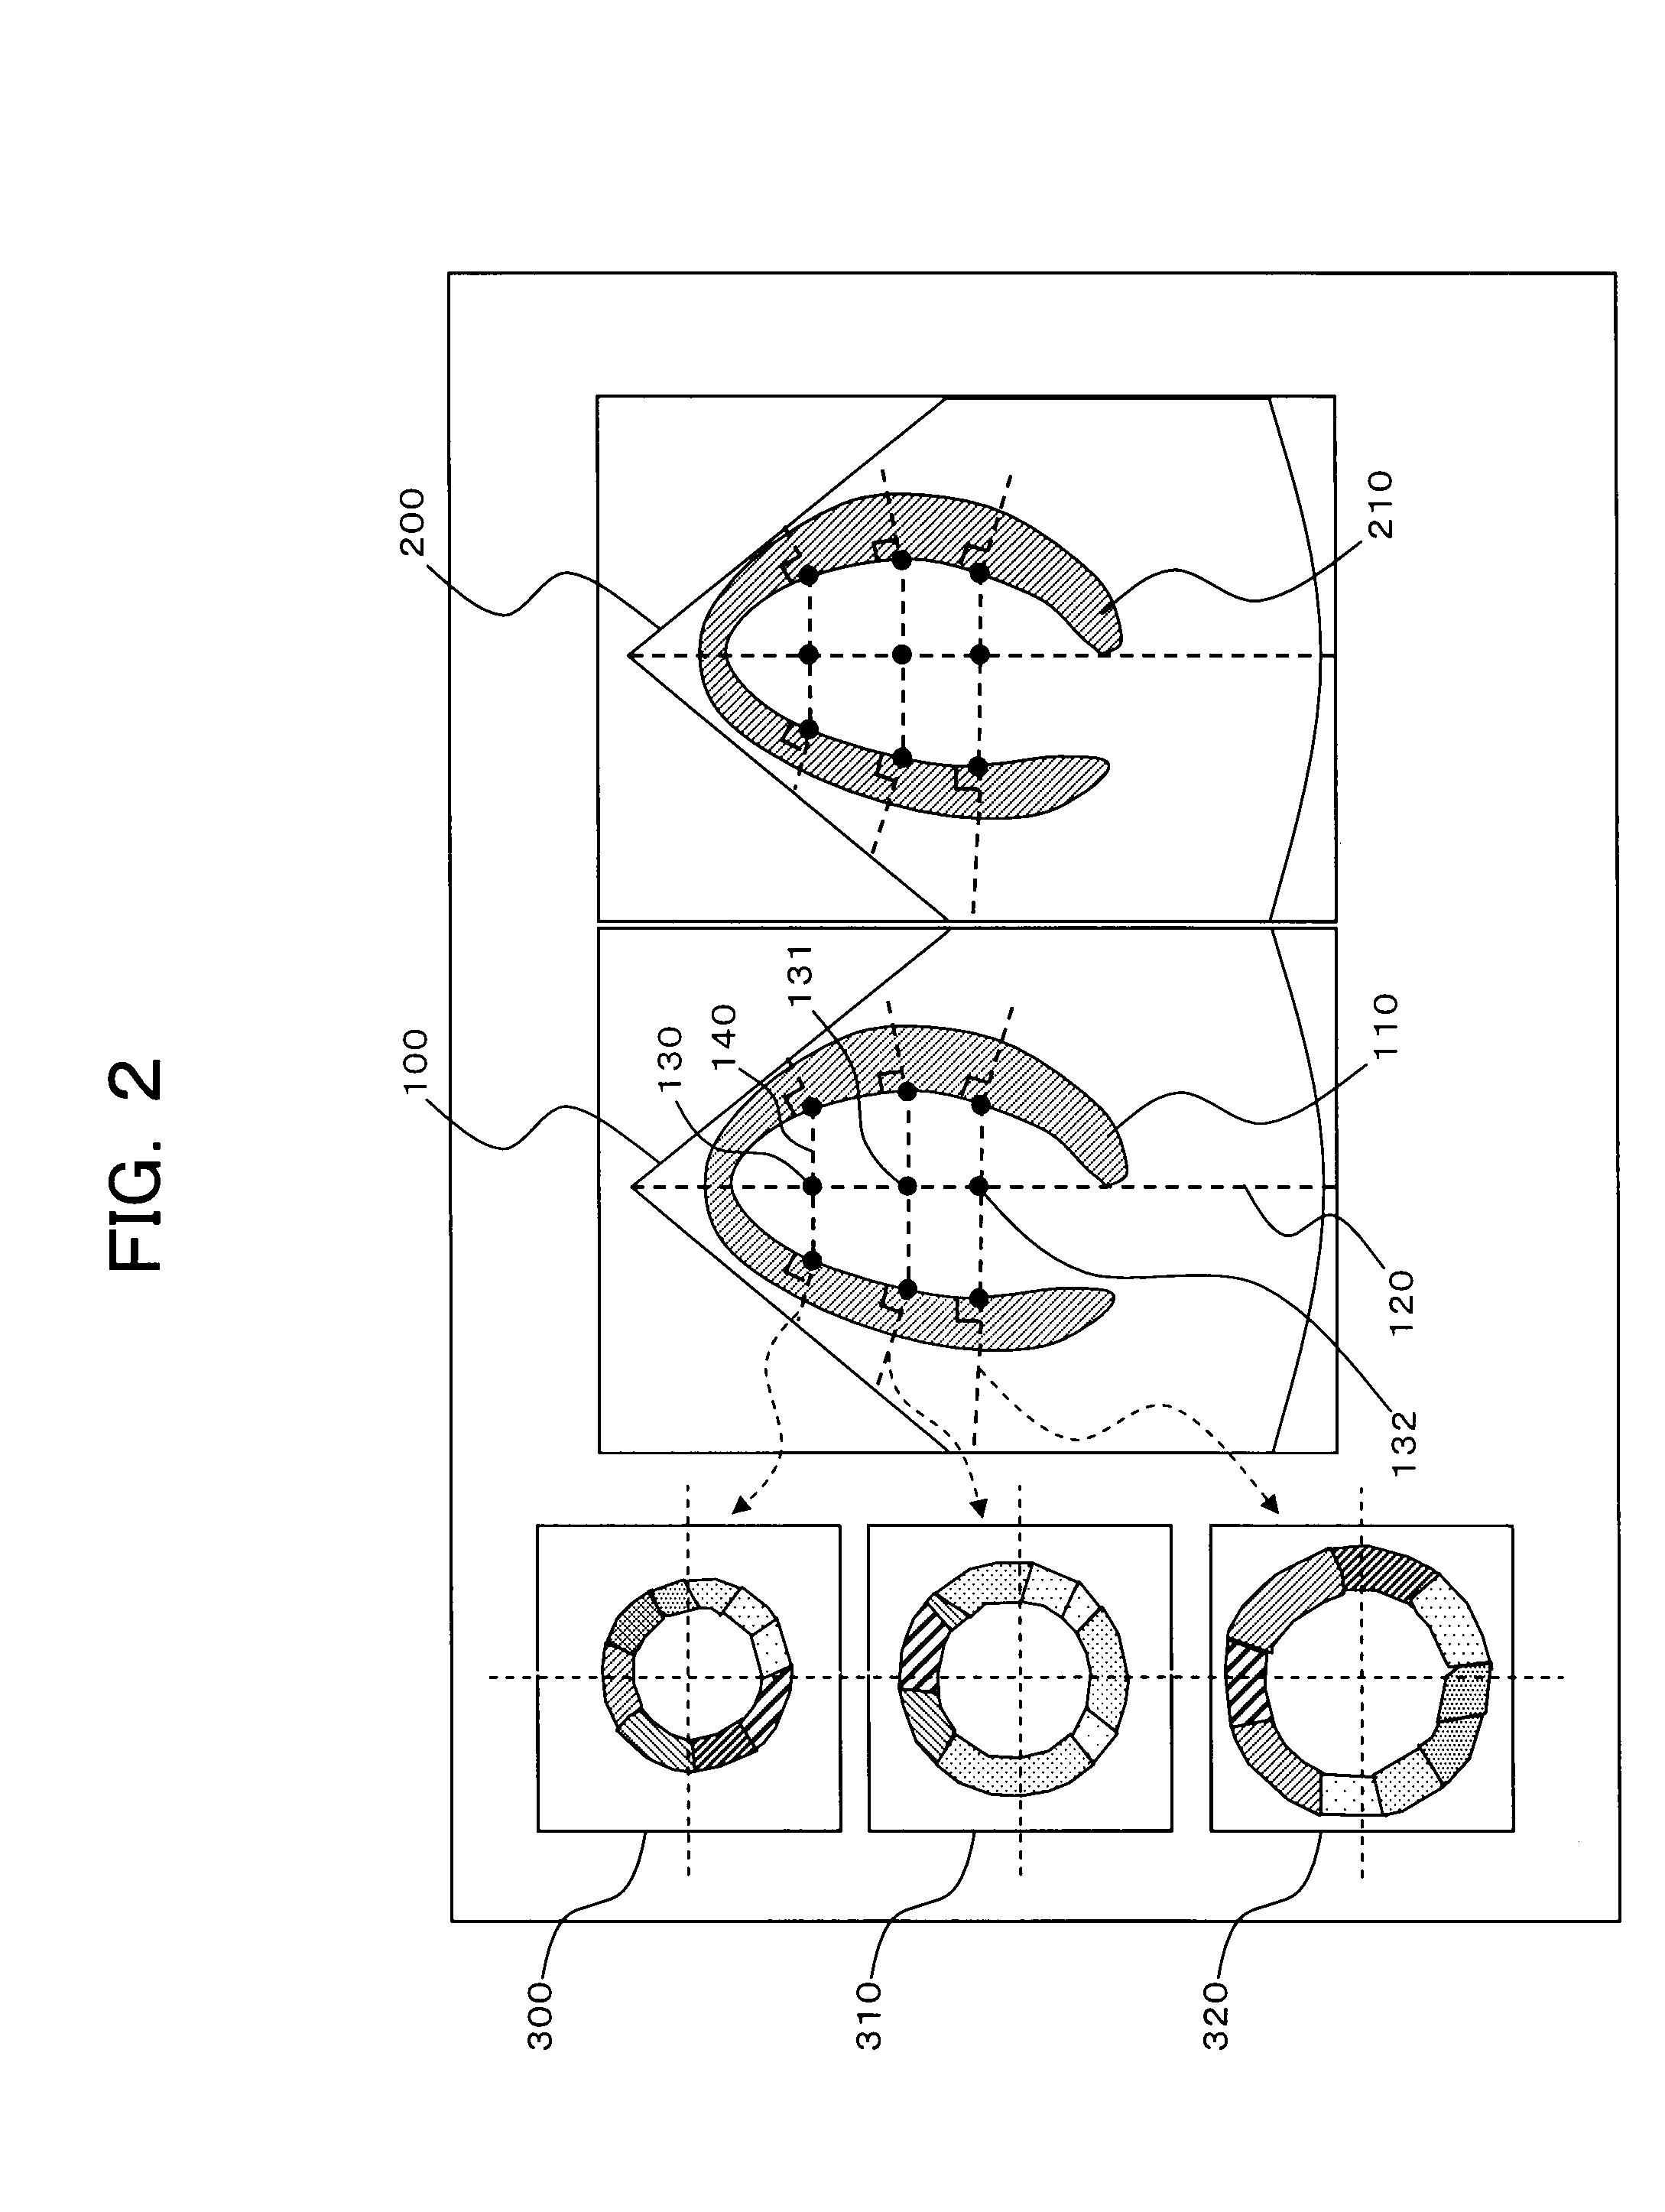 Ultrasonic image processing apparatus and a method for processing an ultrasonic image